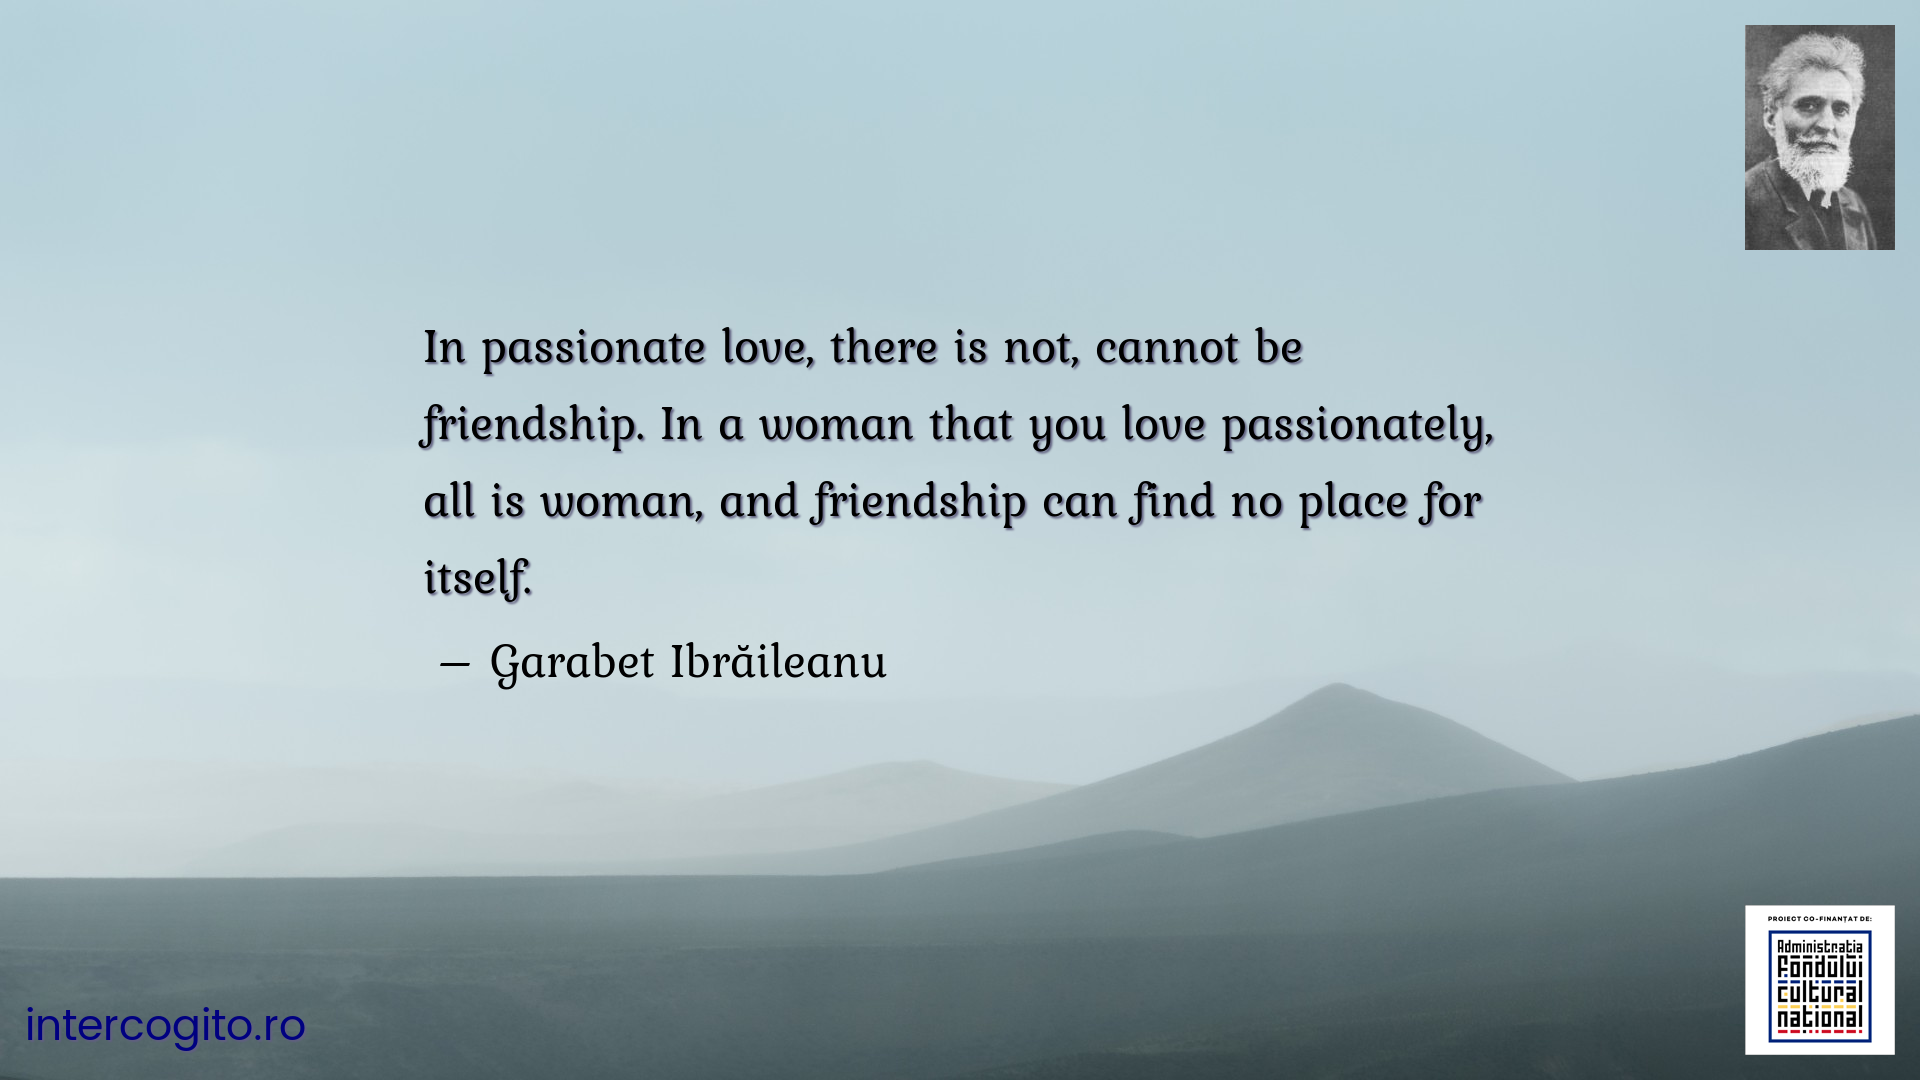 In passionate love, there is not, cannot be friendship. In a woman that you love passionately, all is woman, and friendship can find no place for itself.